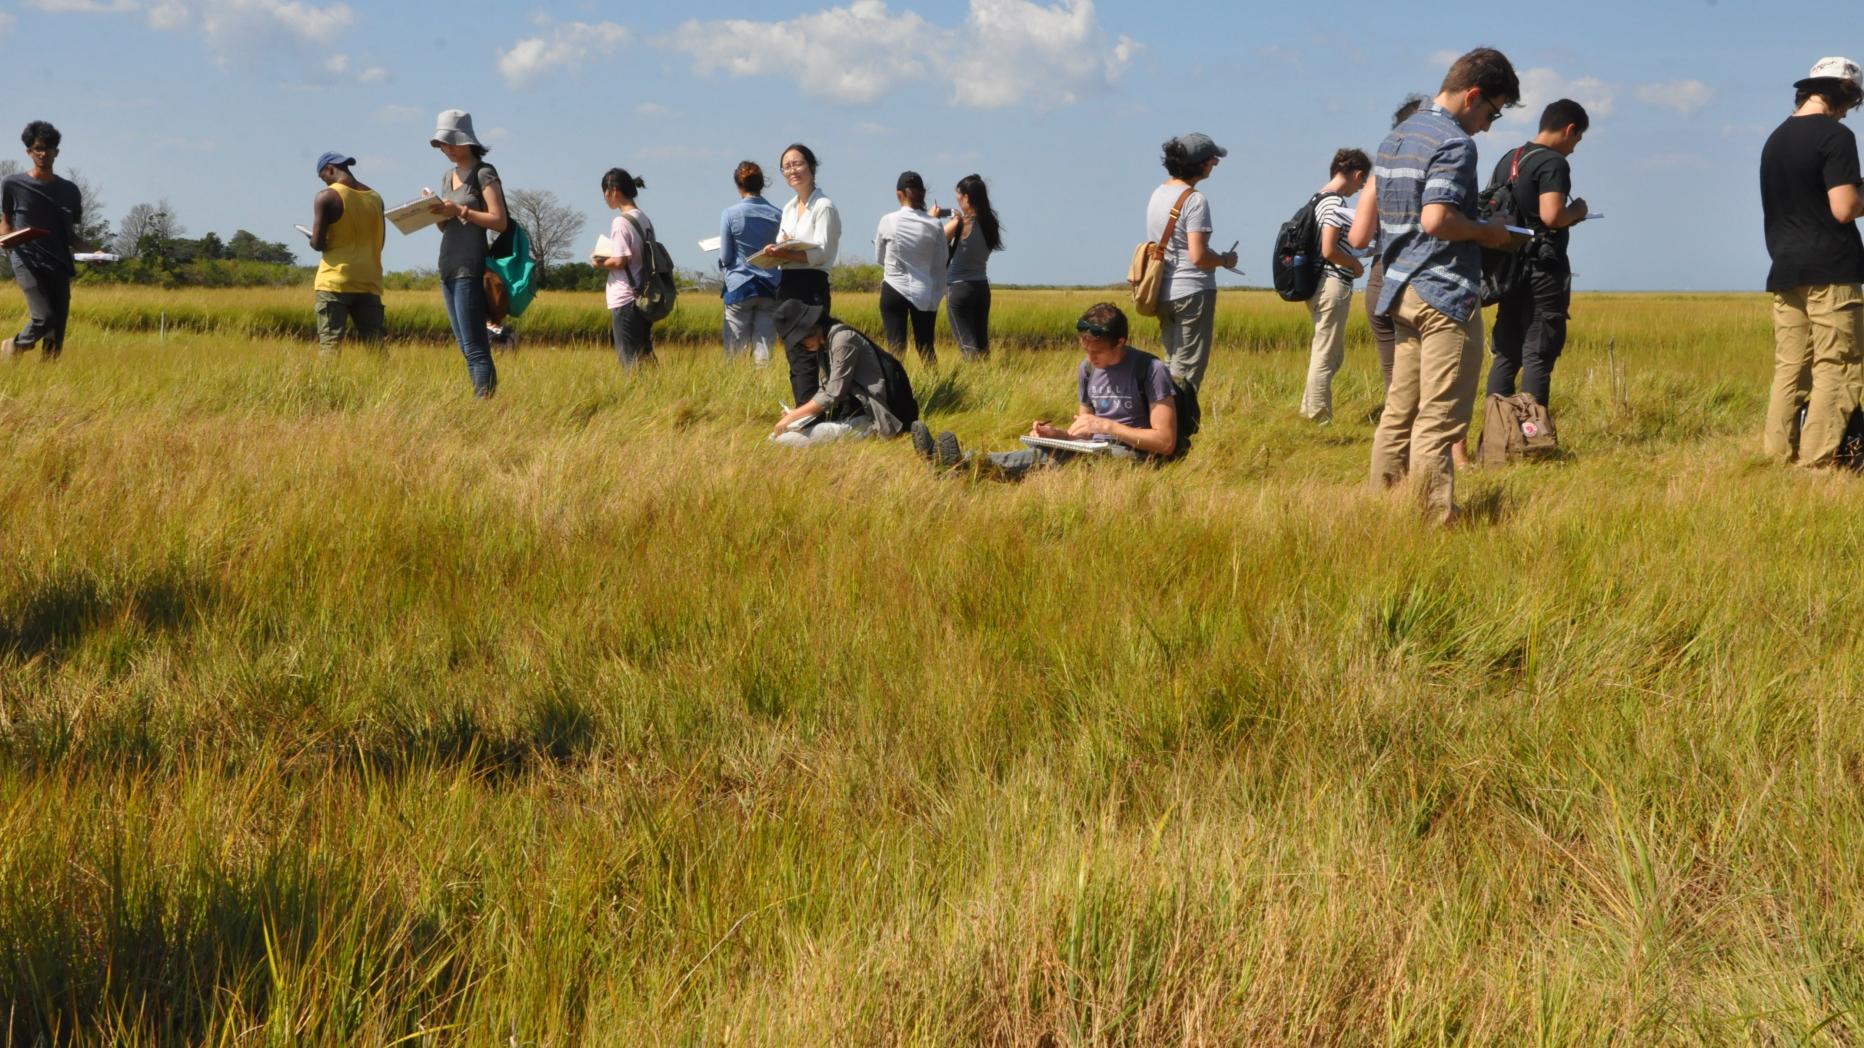 Young people making observations in a grassy prairie